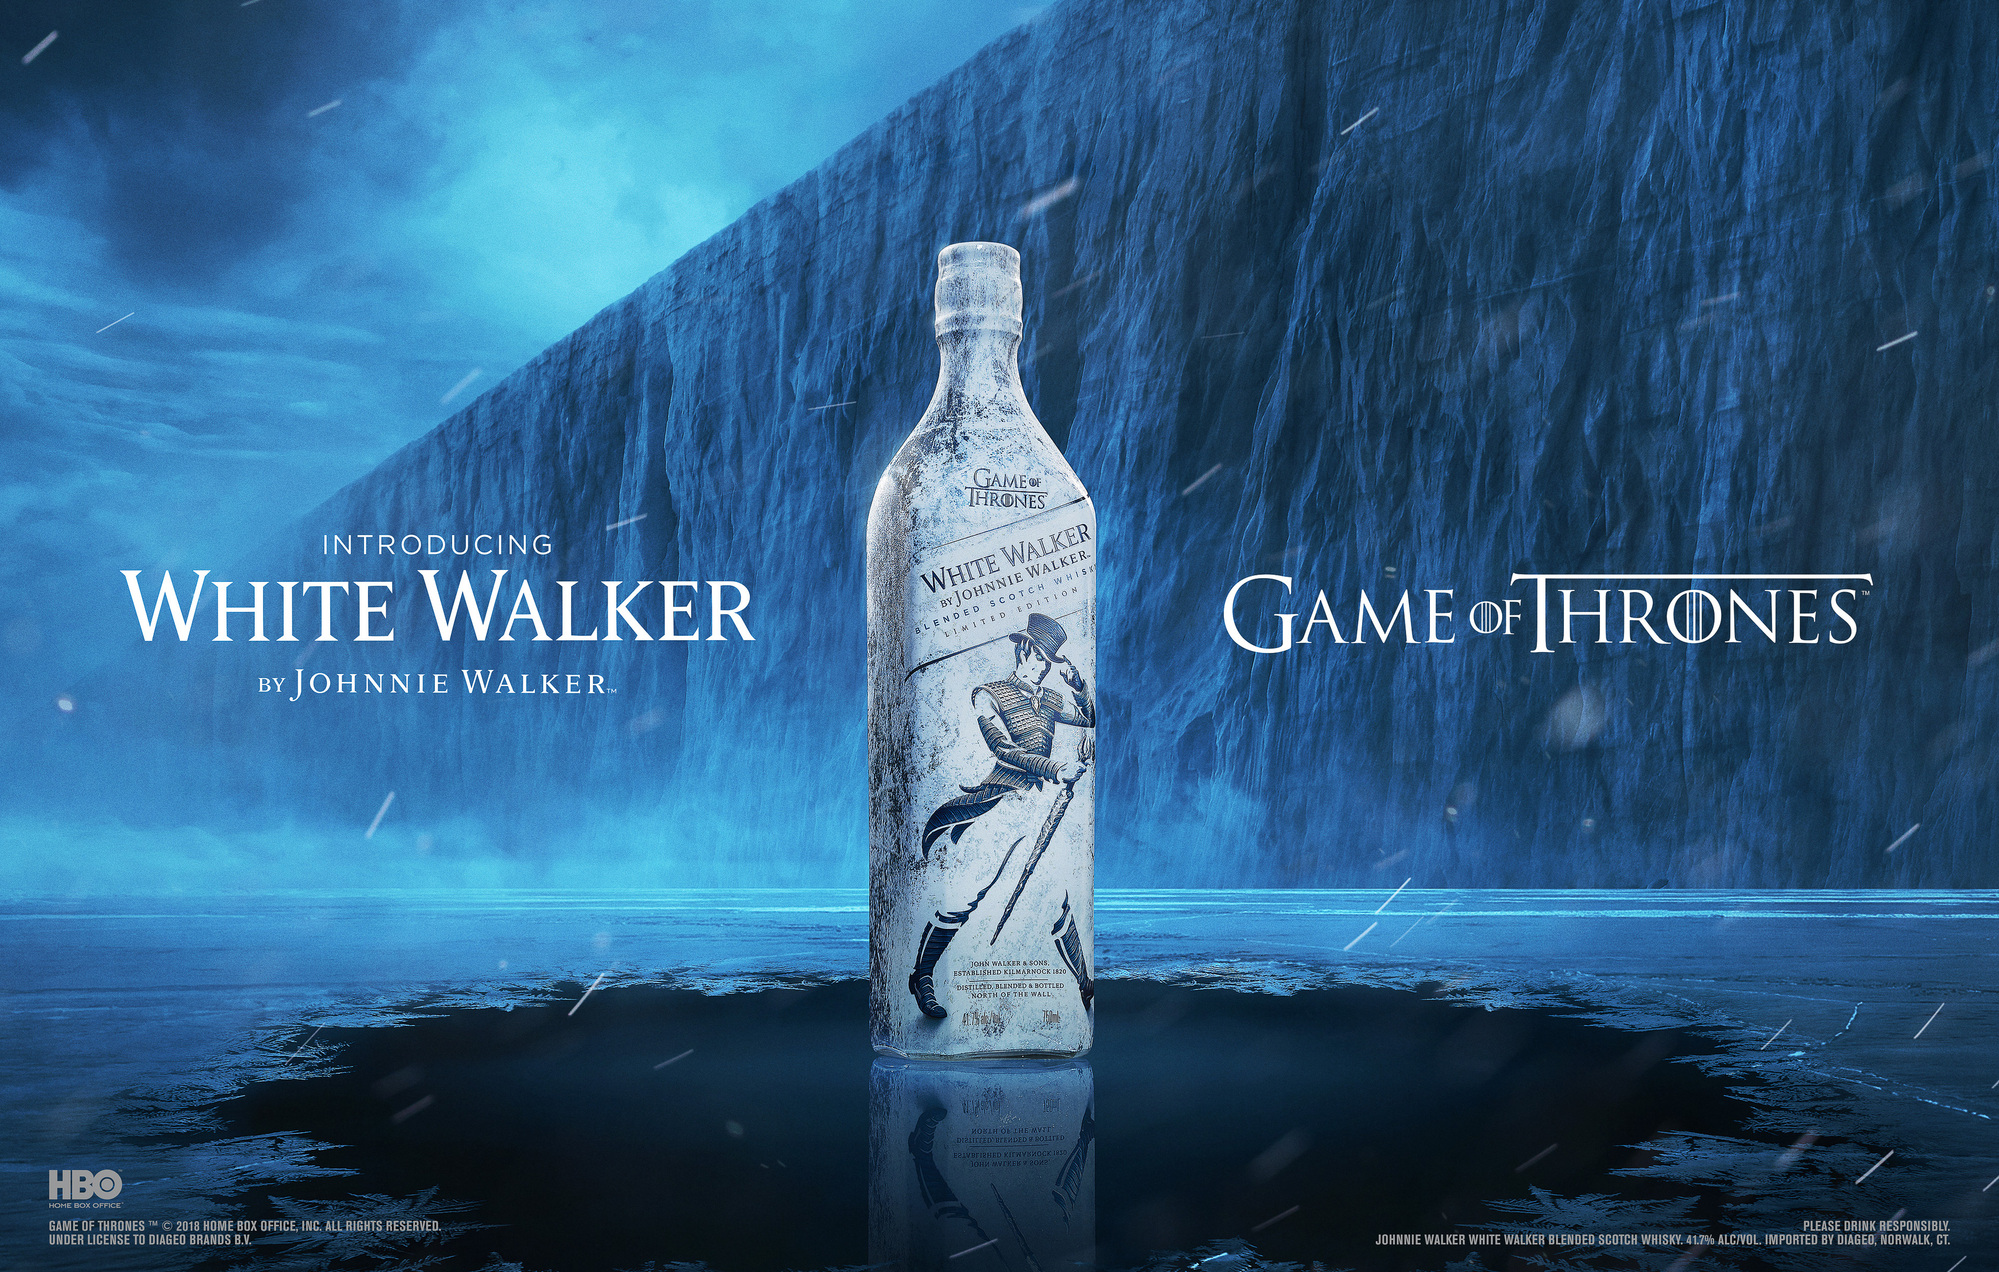 Johnnie Walker White Walker Tear sheet by beverage photographer Timothy Hogan . 

Beverages and alcohol product & advertising photography by Timothy Hogan Studio in Los Angeles